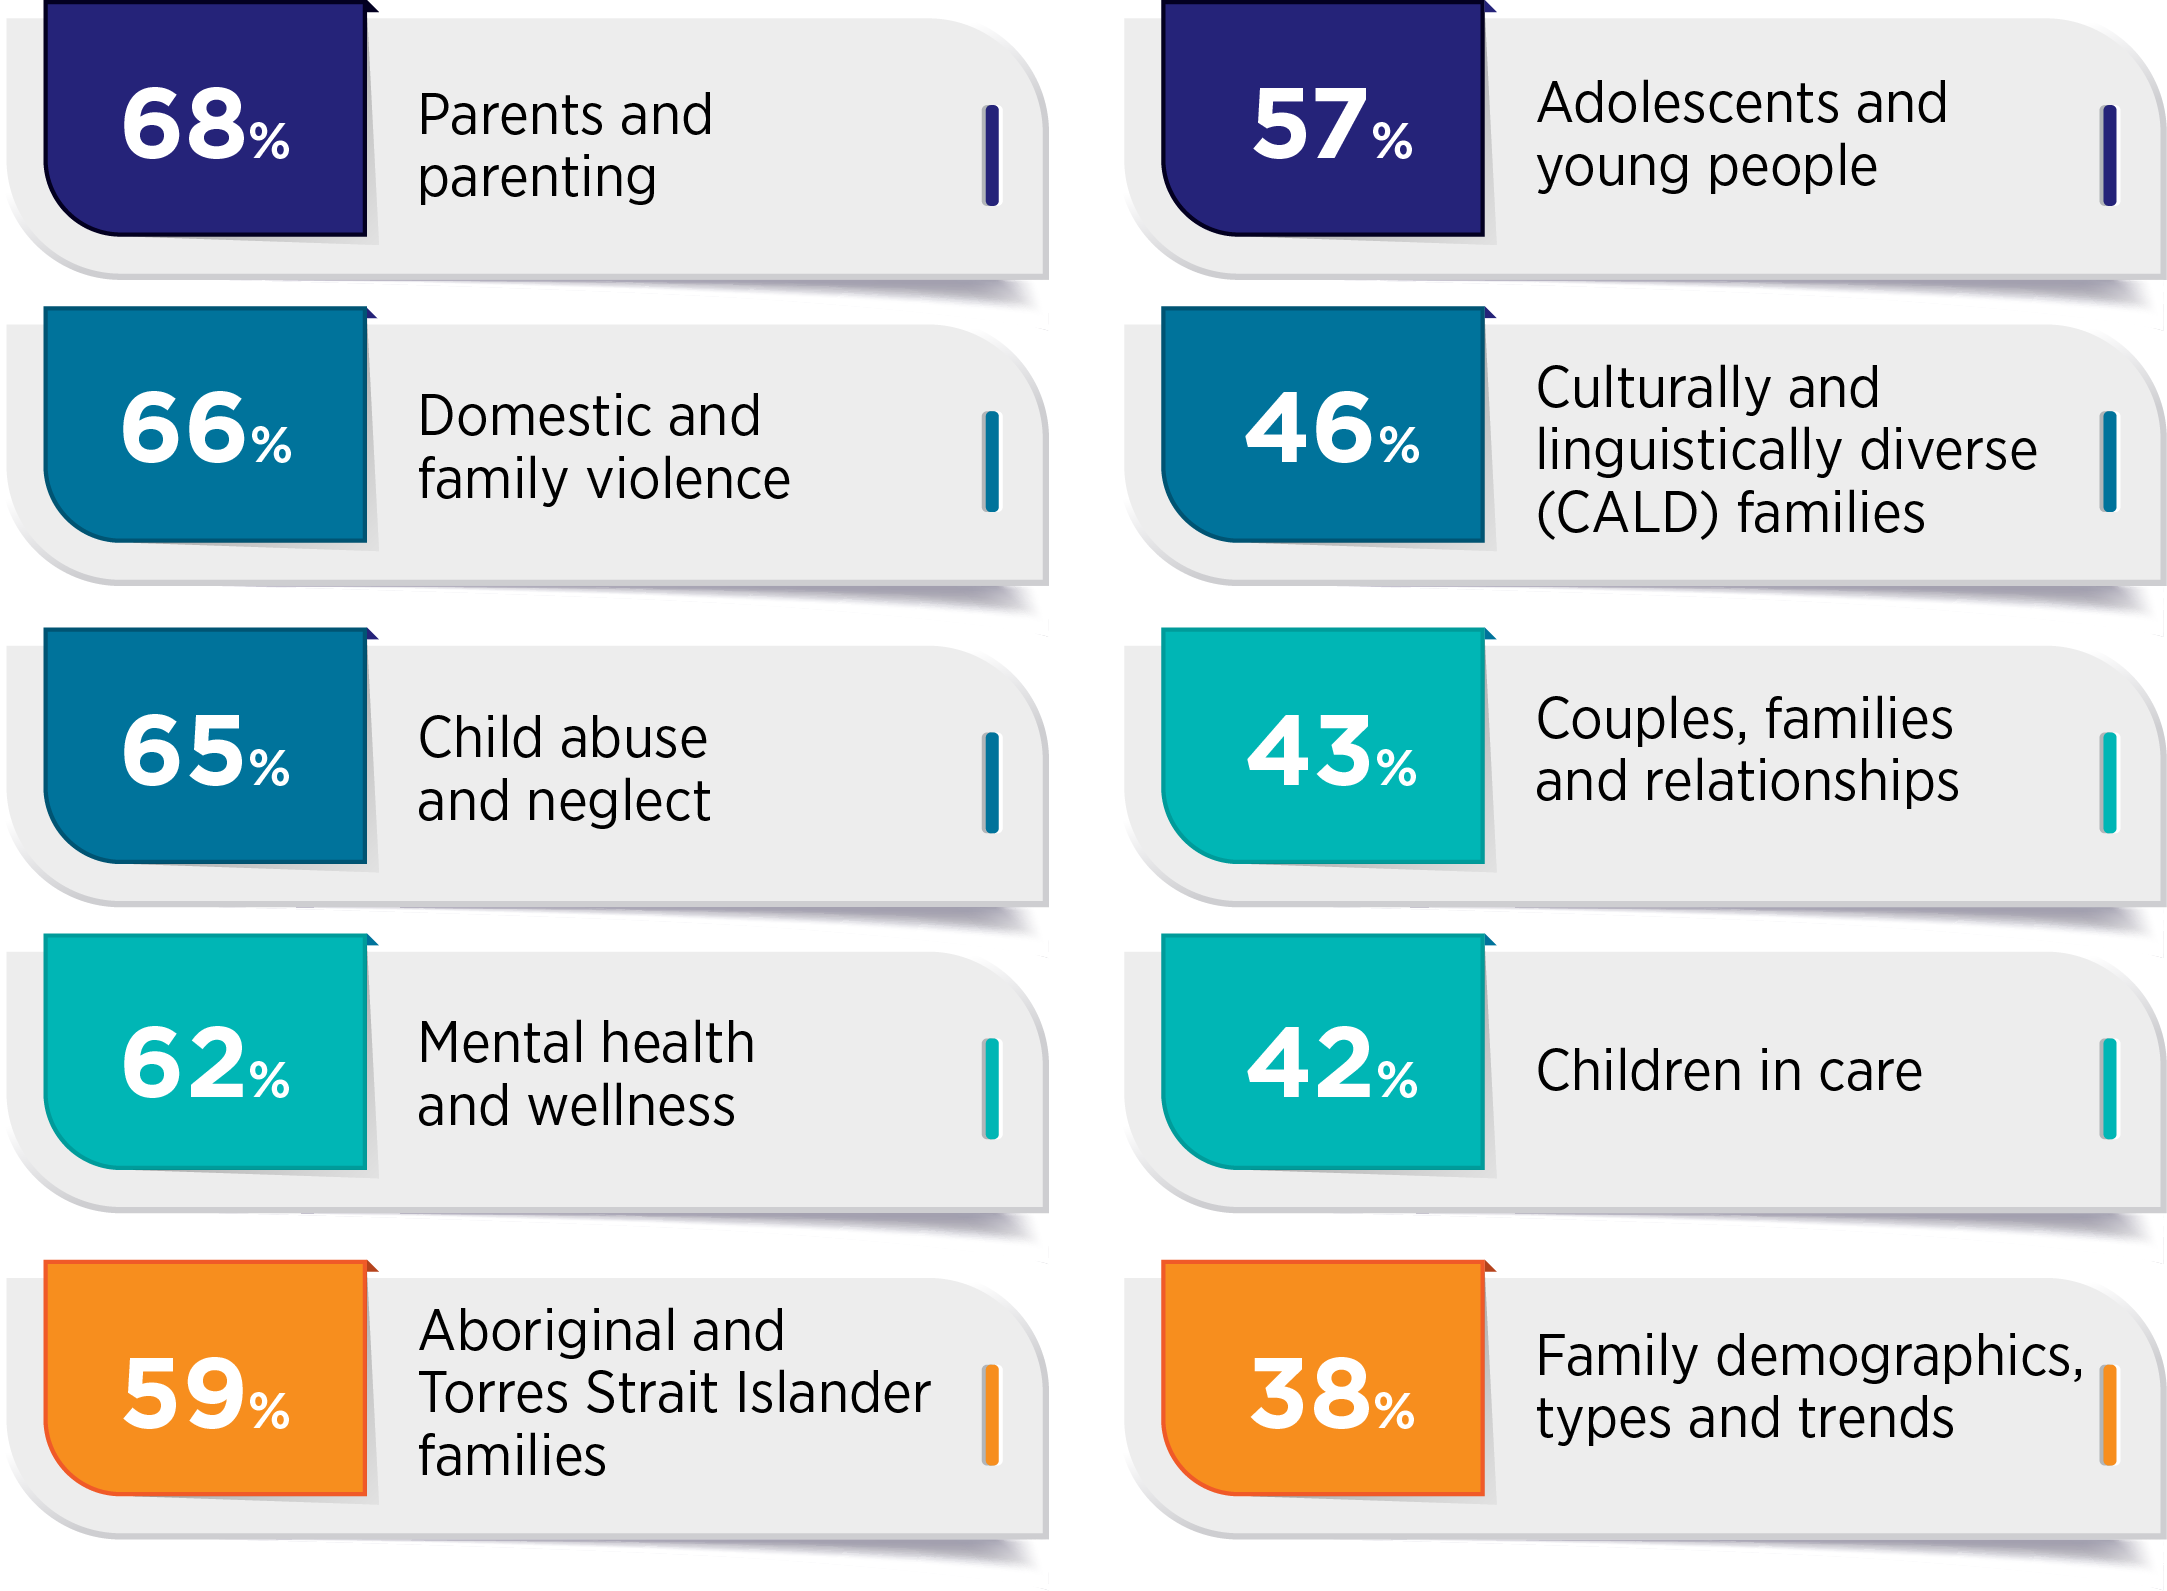 68% Parents and parenting; 66% Domestic and family violence; 65% Child abuse and neglect; 62% Mental health and wellness; 66% Adolescents and young people; 59% Aboriginal and Torres Strait Islander families; 57% Adolescents and young people; 46% Culturally and linguistically diverse (CALD) families; 42% Children in care; 38% Family demographics, types and trends.